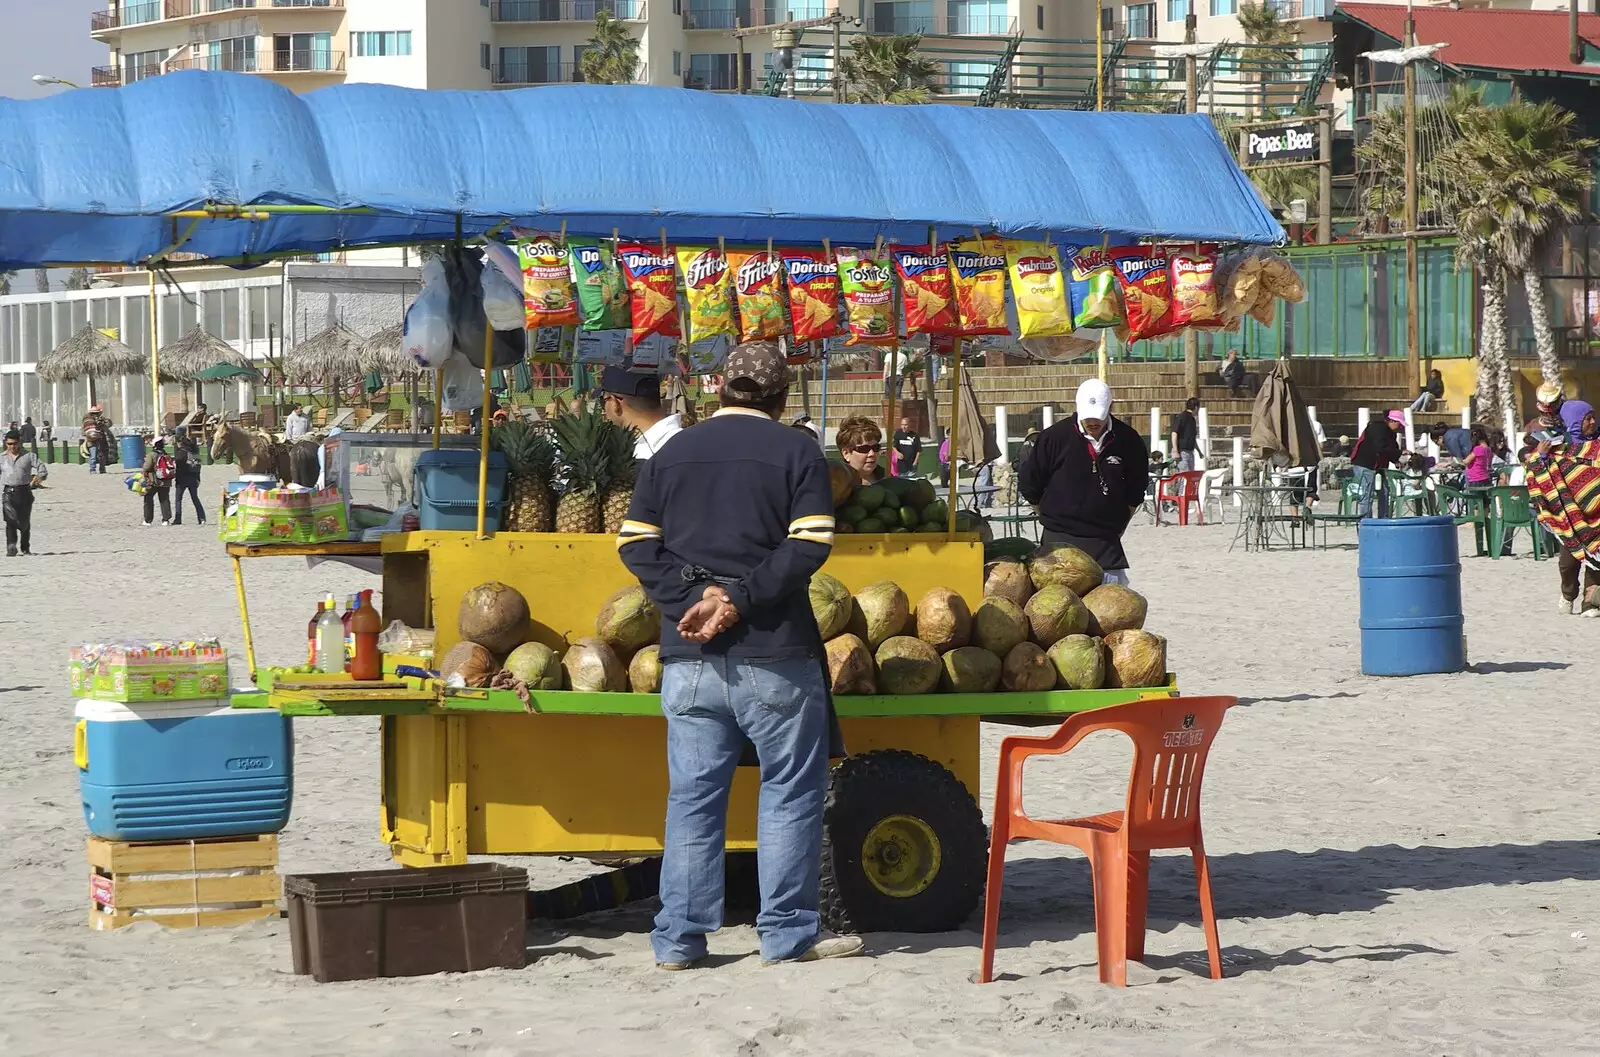 Fruit and crisps seller, from Rosarito and Tijuana, Baja California, Mexico - 2nd March 2008